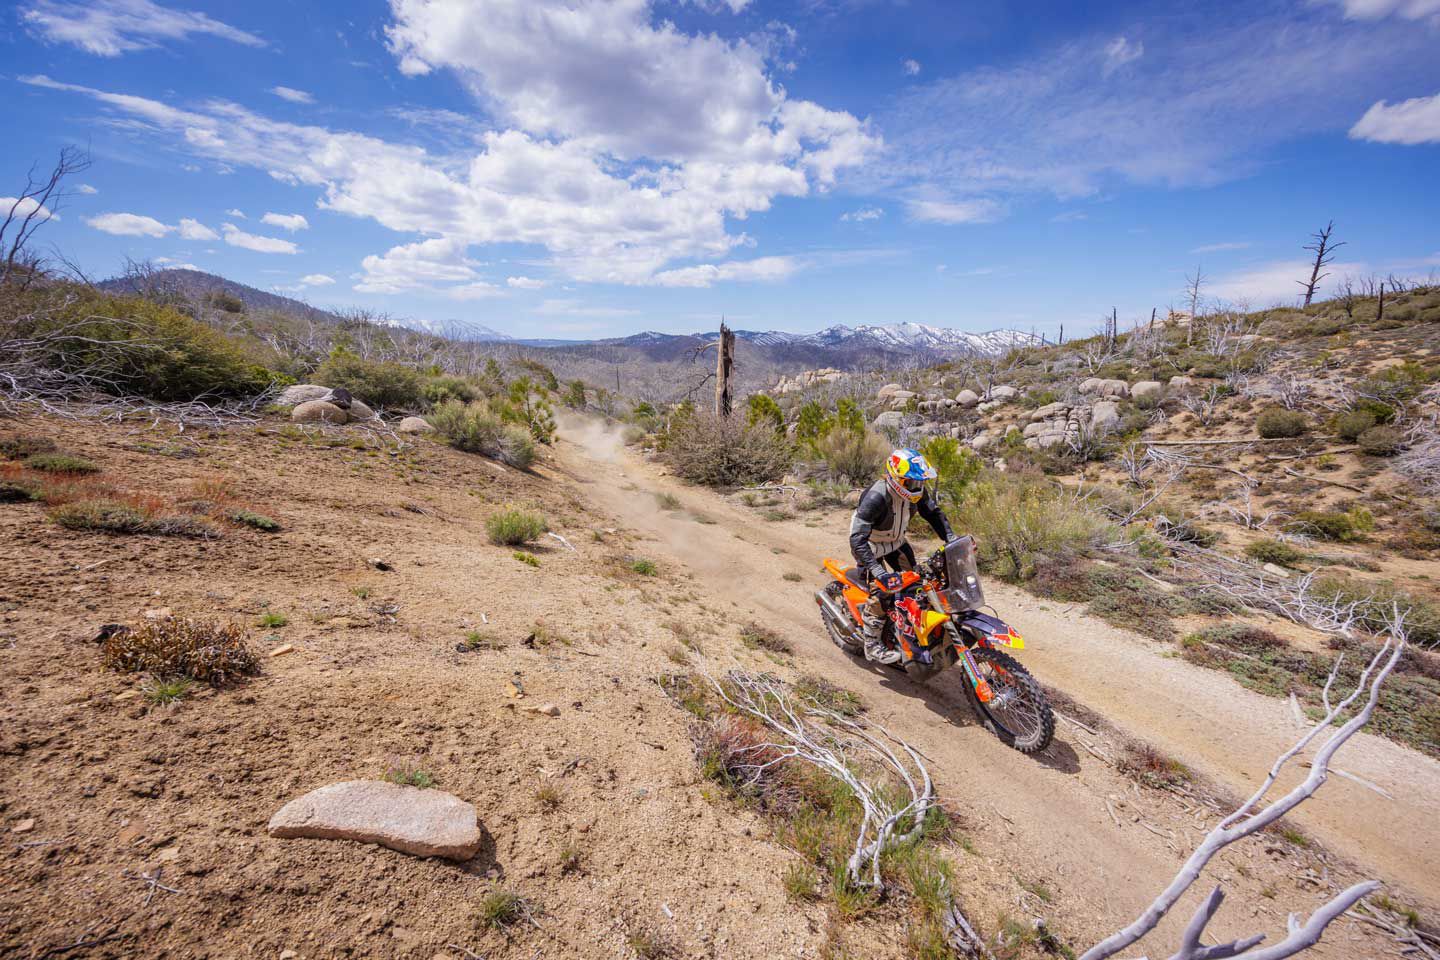 Dakar racing champion Toby Price shows us how it’s done on his prototype KTM 450 Rally bike.